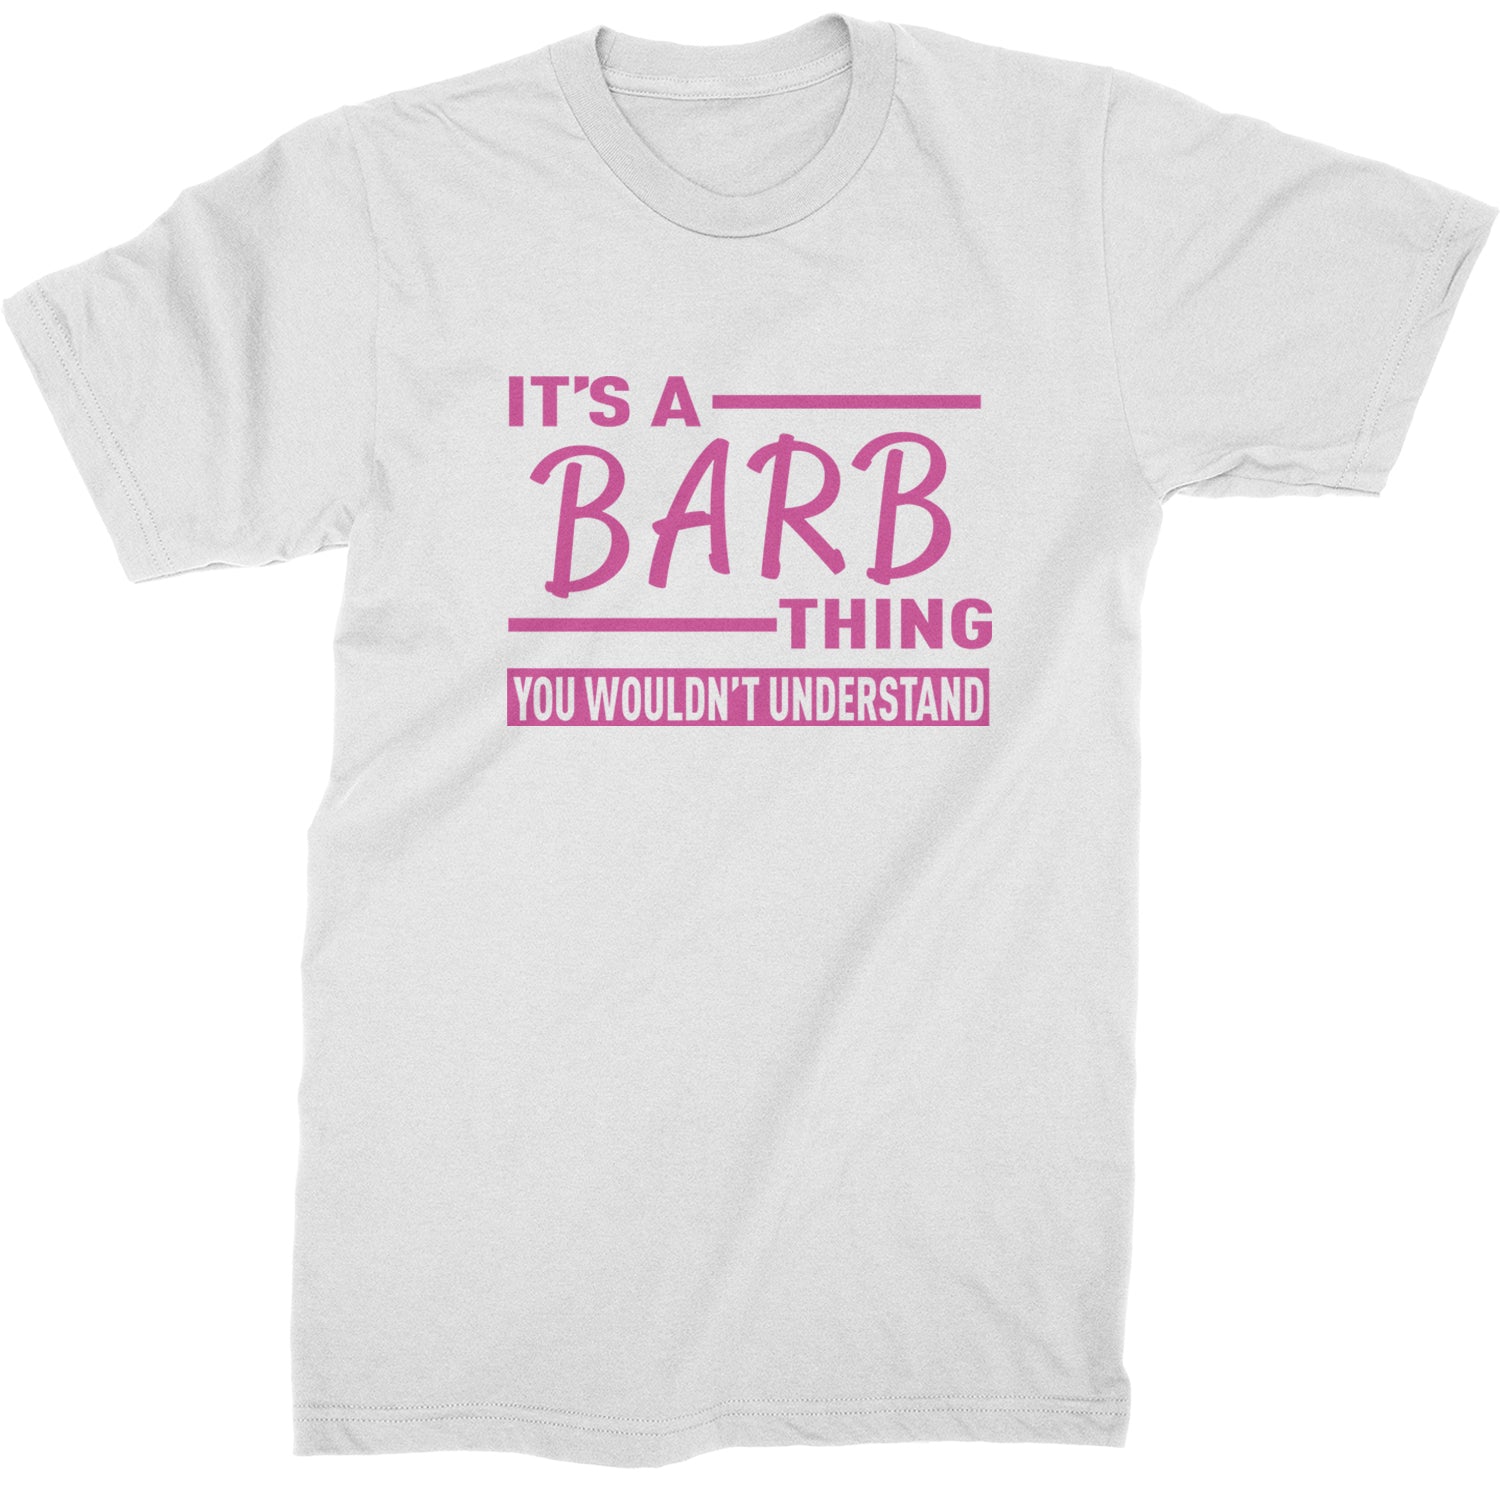 It's A Barb Thing, You Wouldn't Understand Mens T-shirt